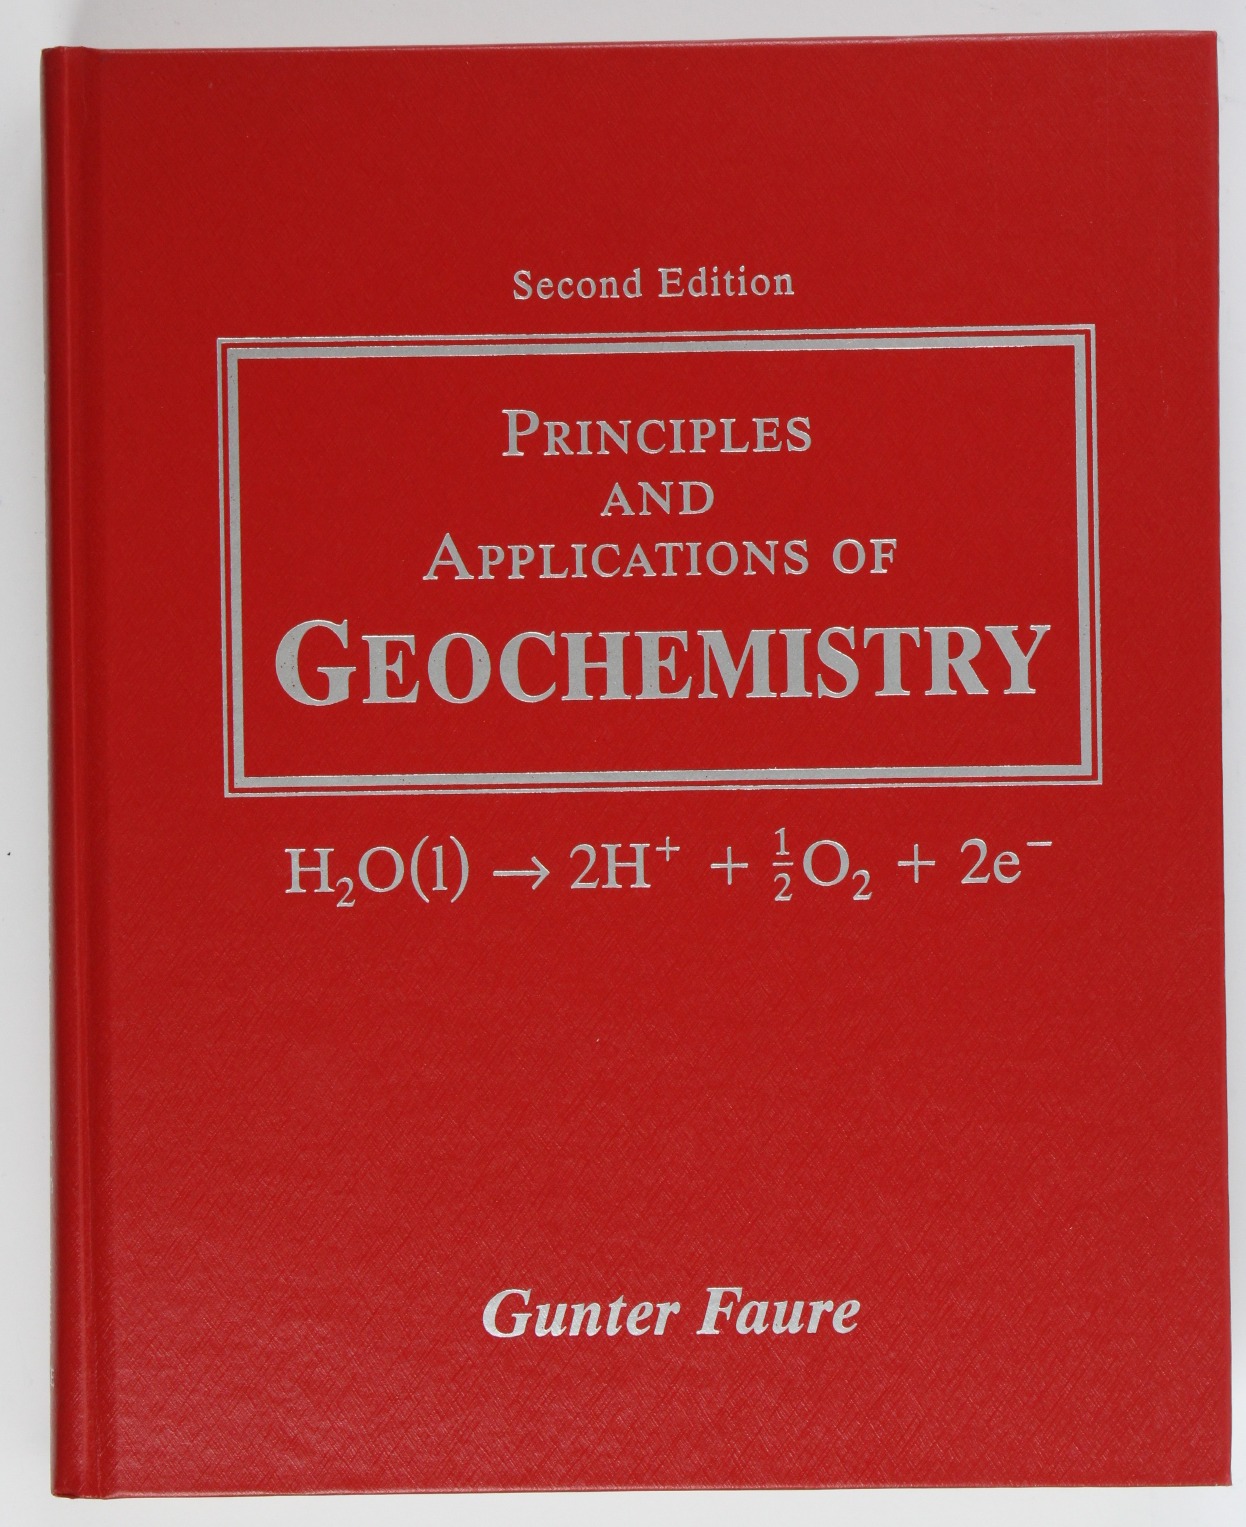 Principles and Applications of Geochemistry: A Comprehensive Textbook for Geology Students (Hewlett Packard Professional Books) - Faure, Gunter